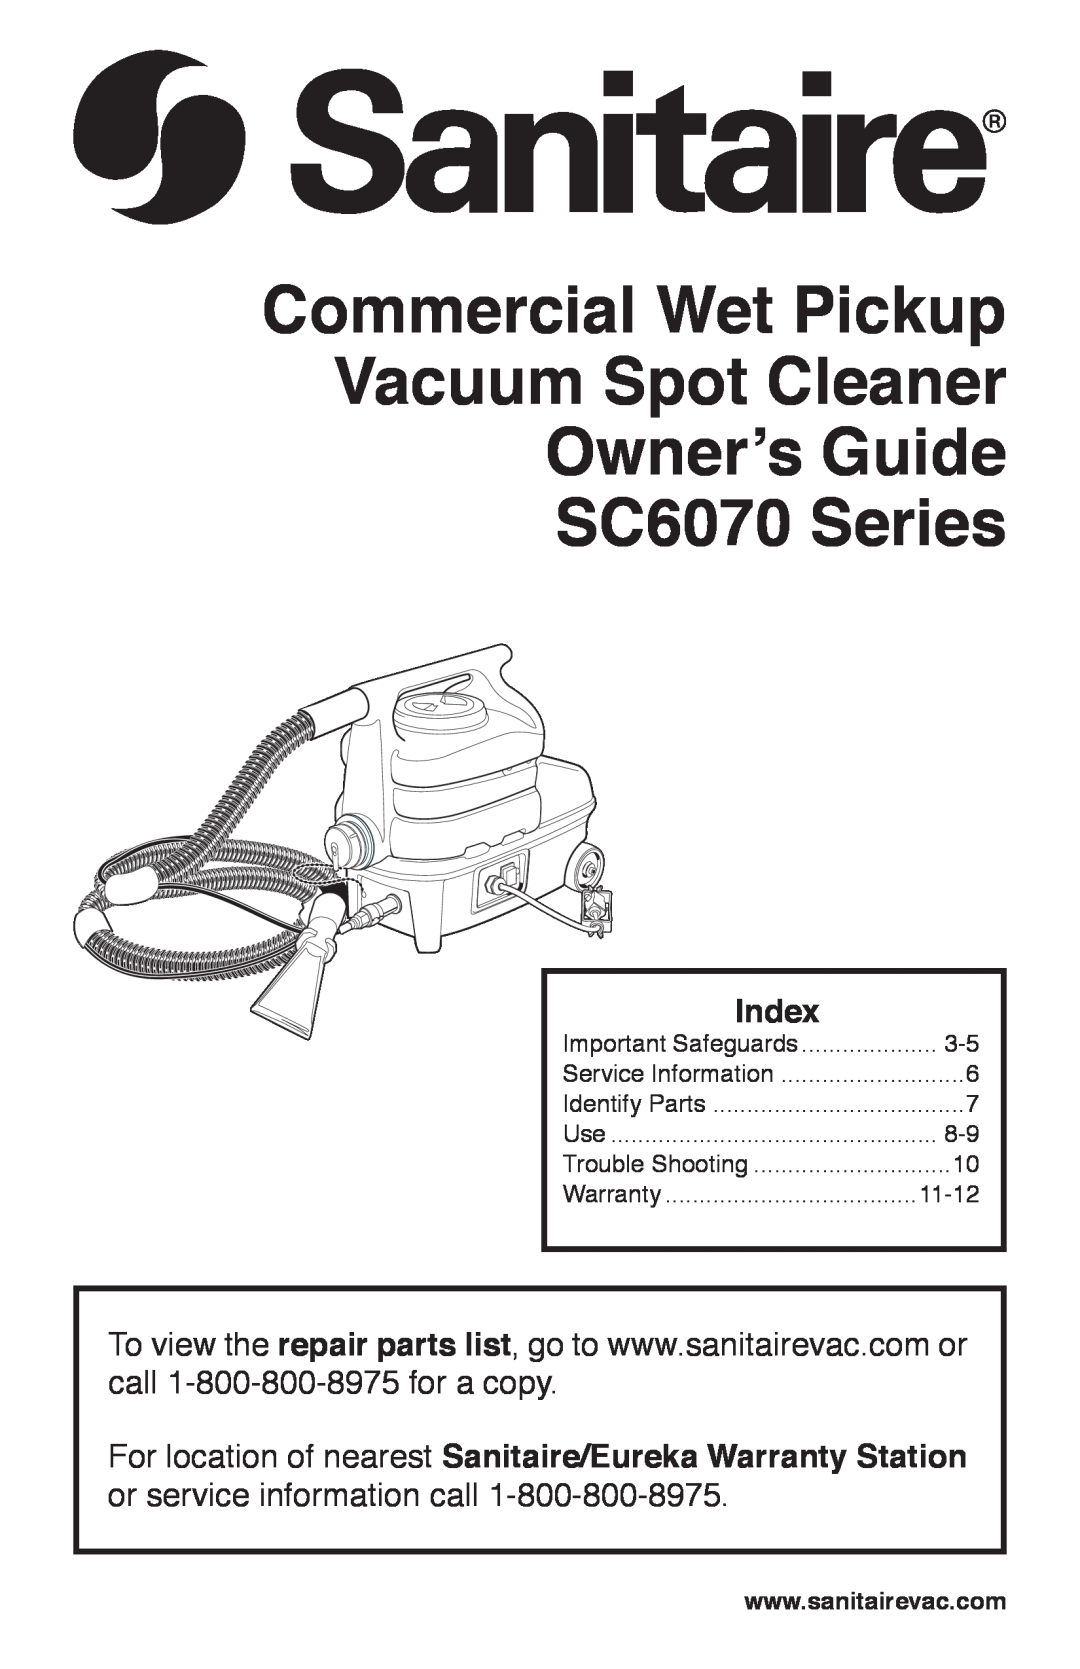 Sanitaire warranty Index, Commercial Wet Pickup Vacuum Spot Cleaner, Ownerʼs Guide SC6070 Series, Service Information 